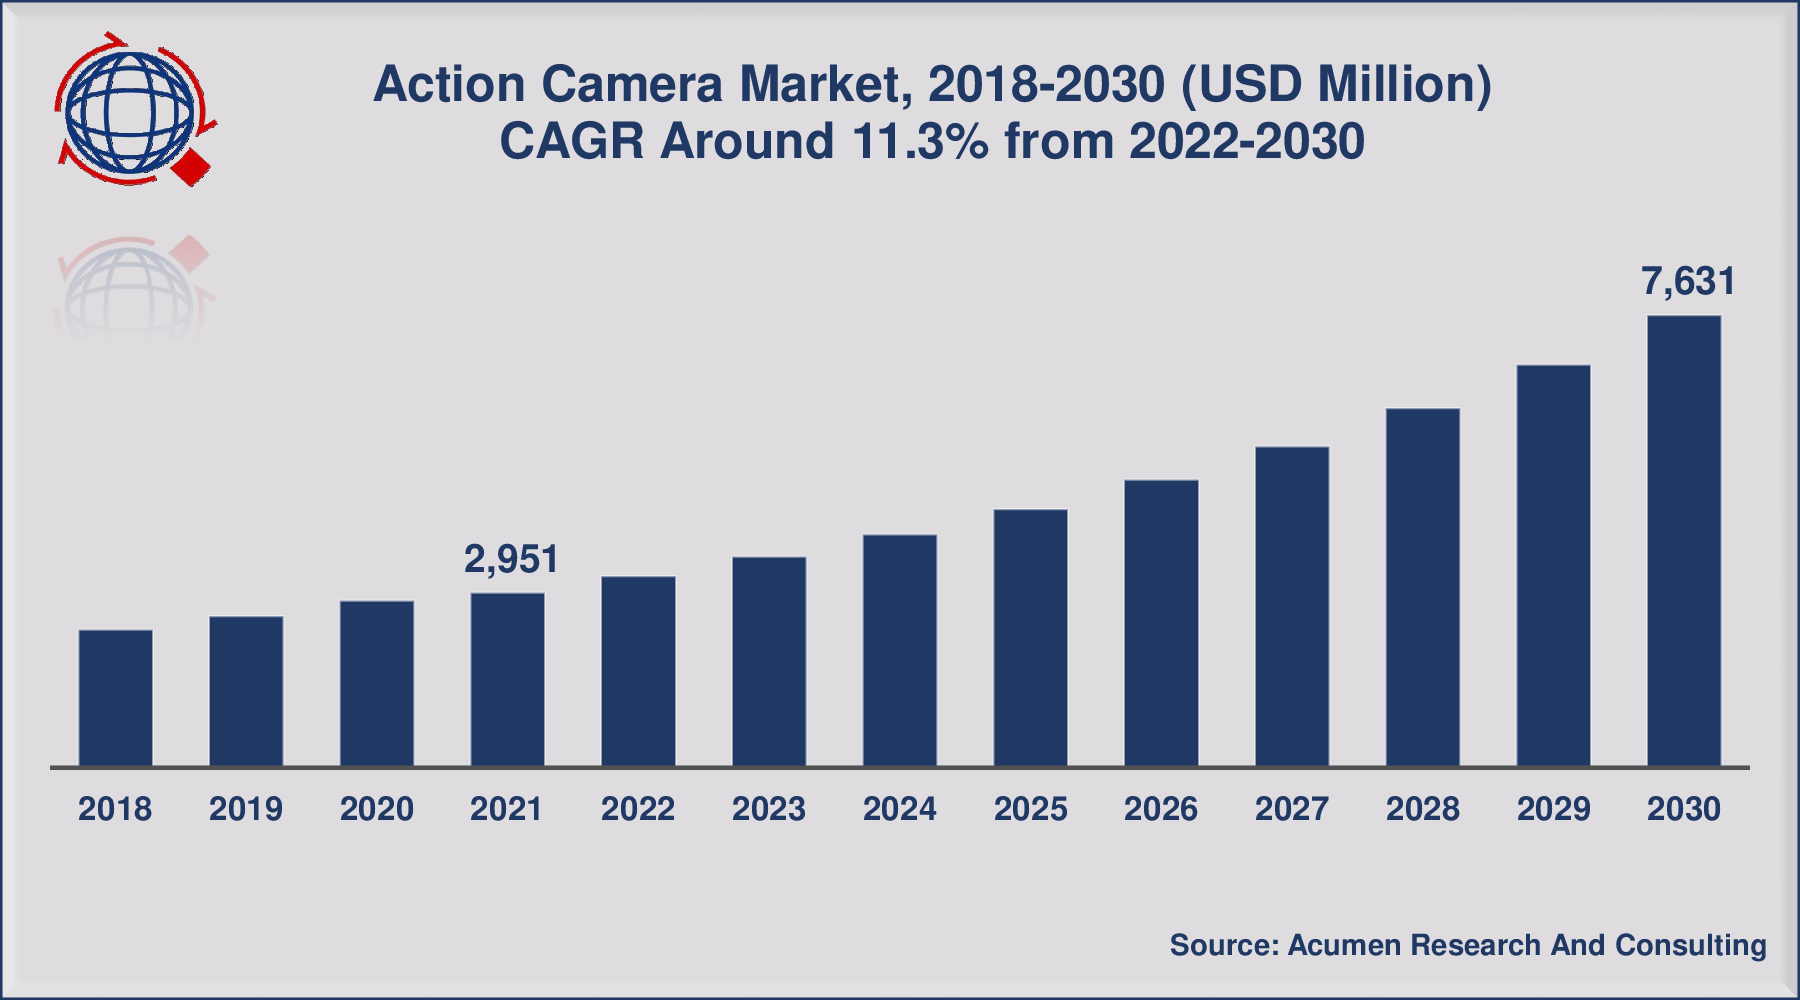 Action Camera Market Size is expected to reach at USD 7,631